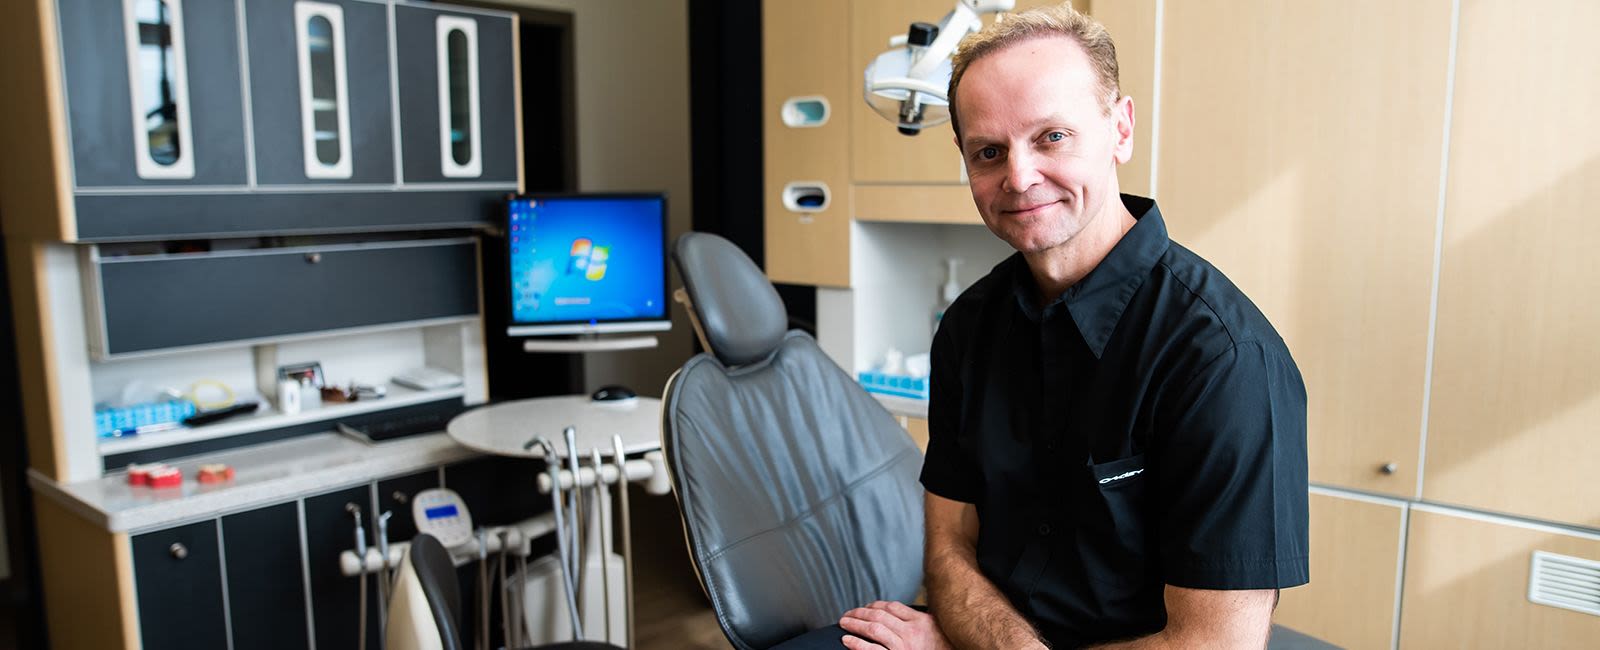 Welcoming New Patients, Burnaby Dentists